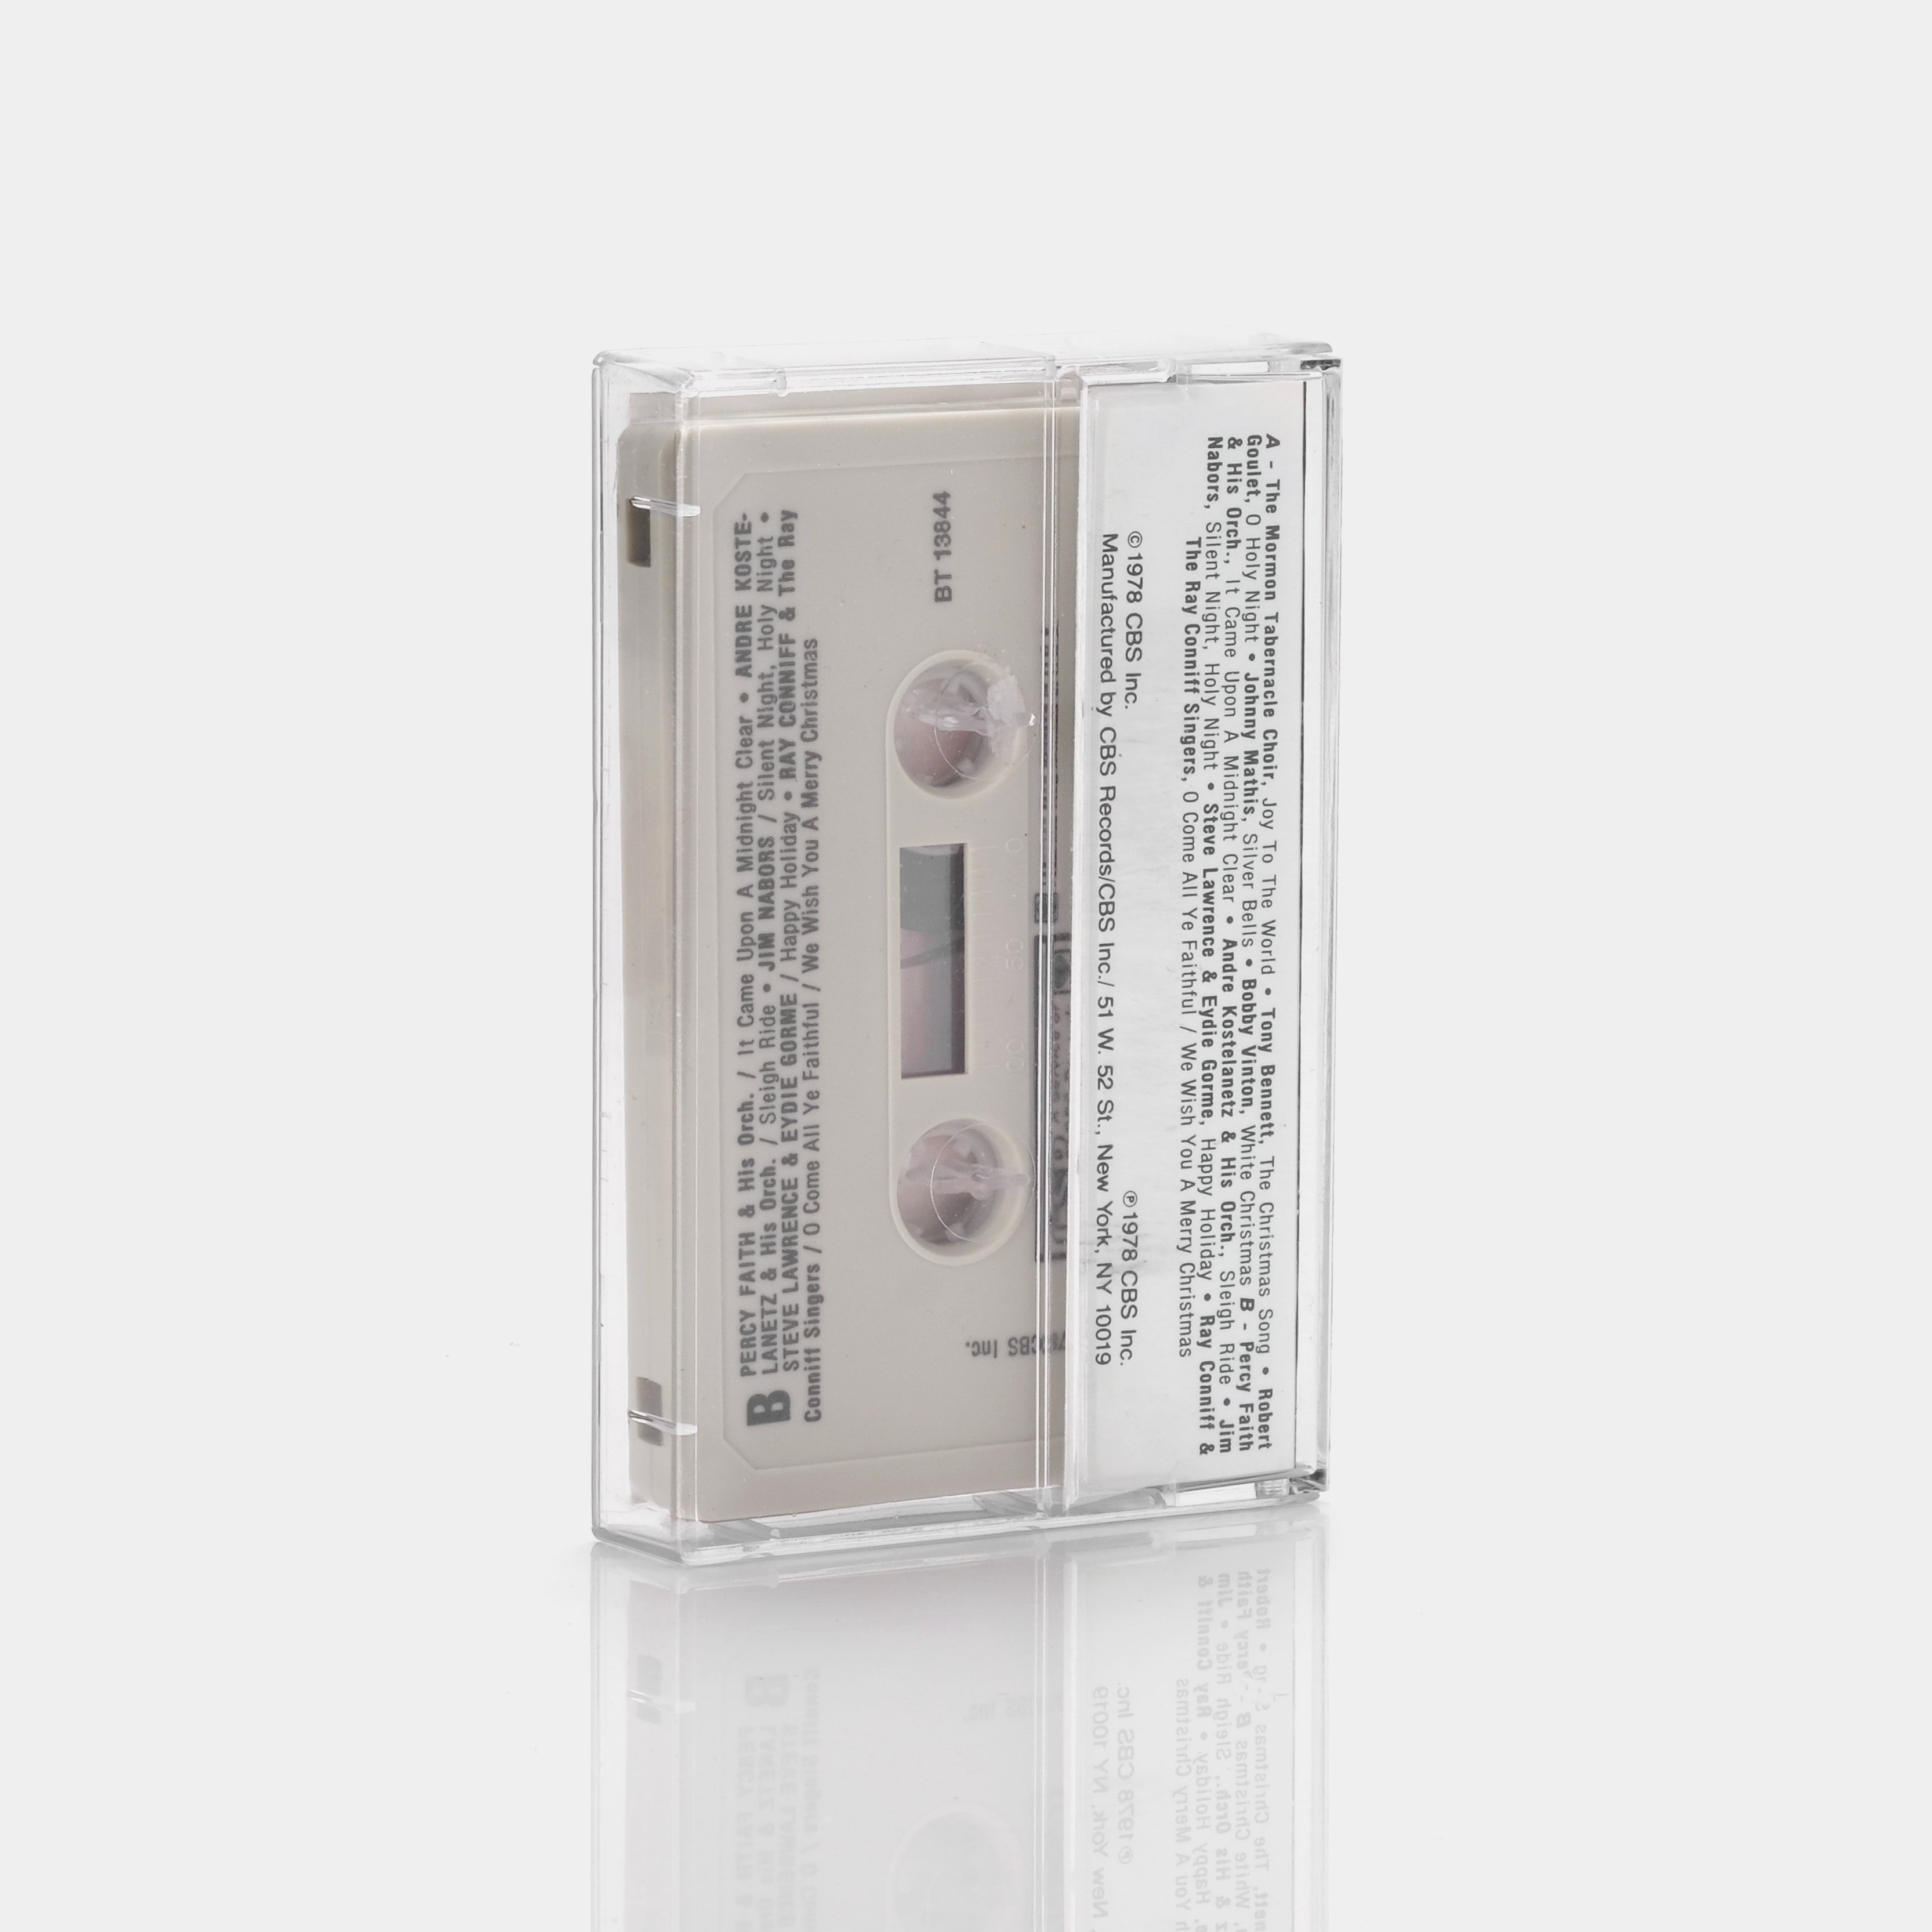 Christmas Wishes Cassette Tape